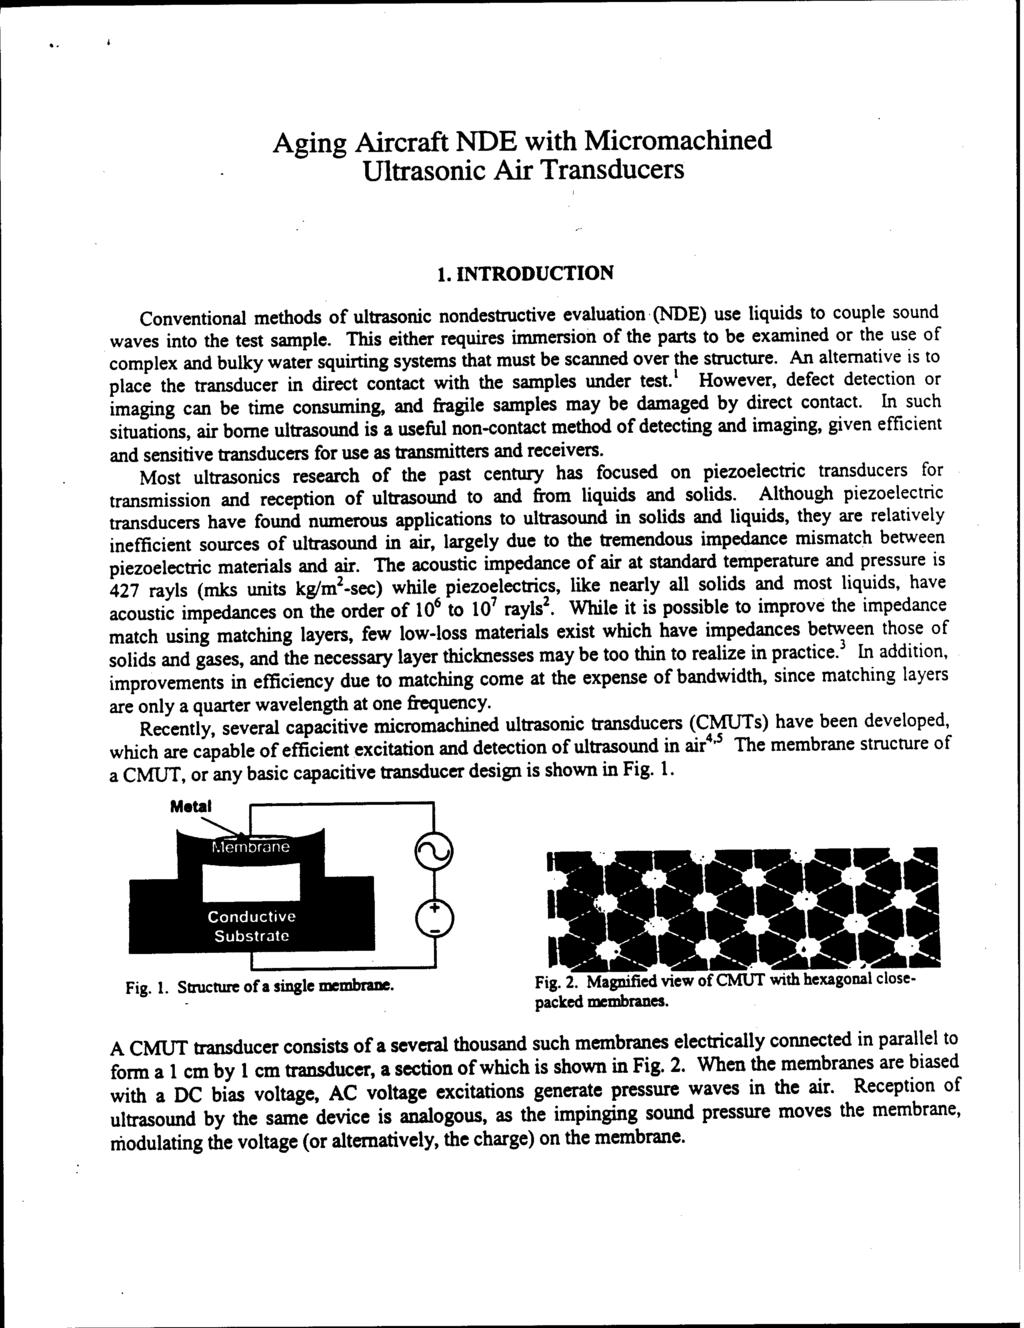 Aging Aircraft NDE with Micromachined Ultrasonic Air Transducers 1.